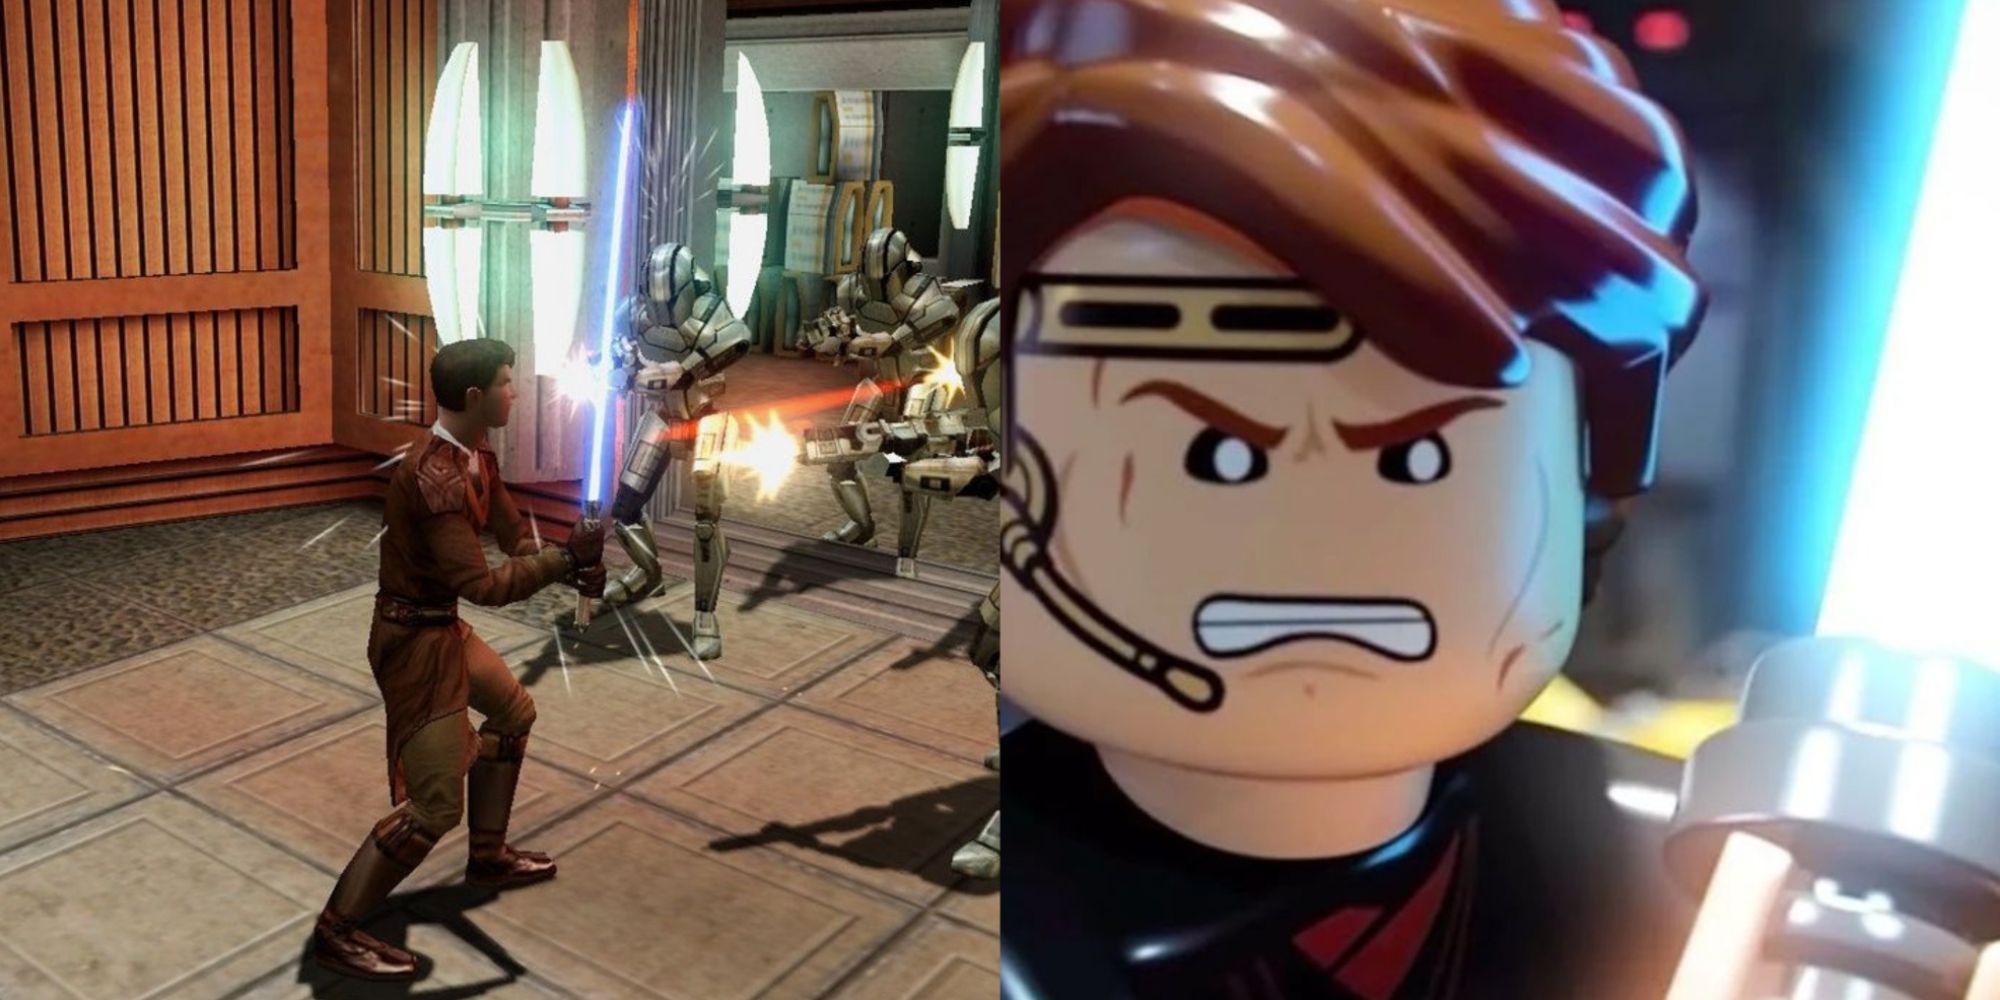 Star Wars Longest Games Featured Split Image Knights Of The Republic And Skywalker Saga